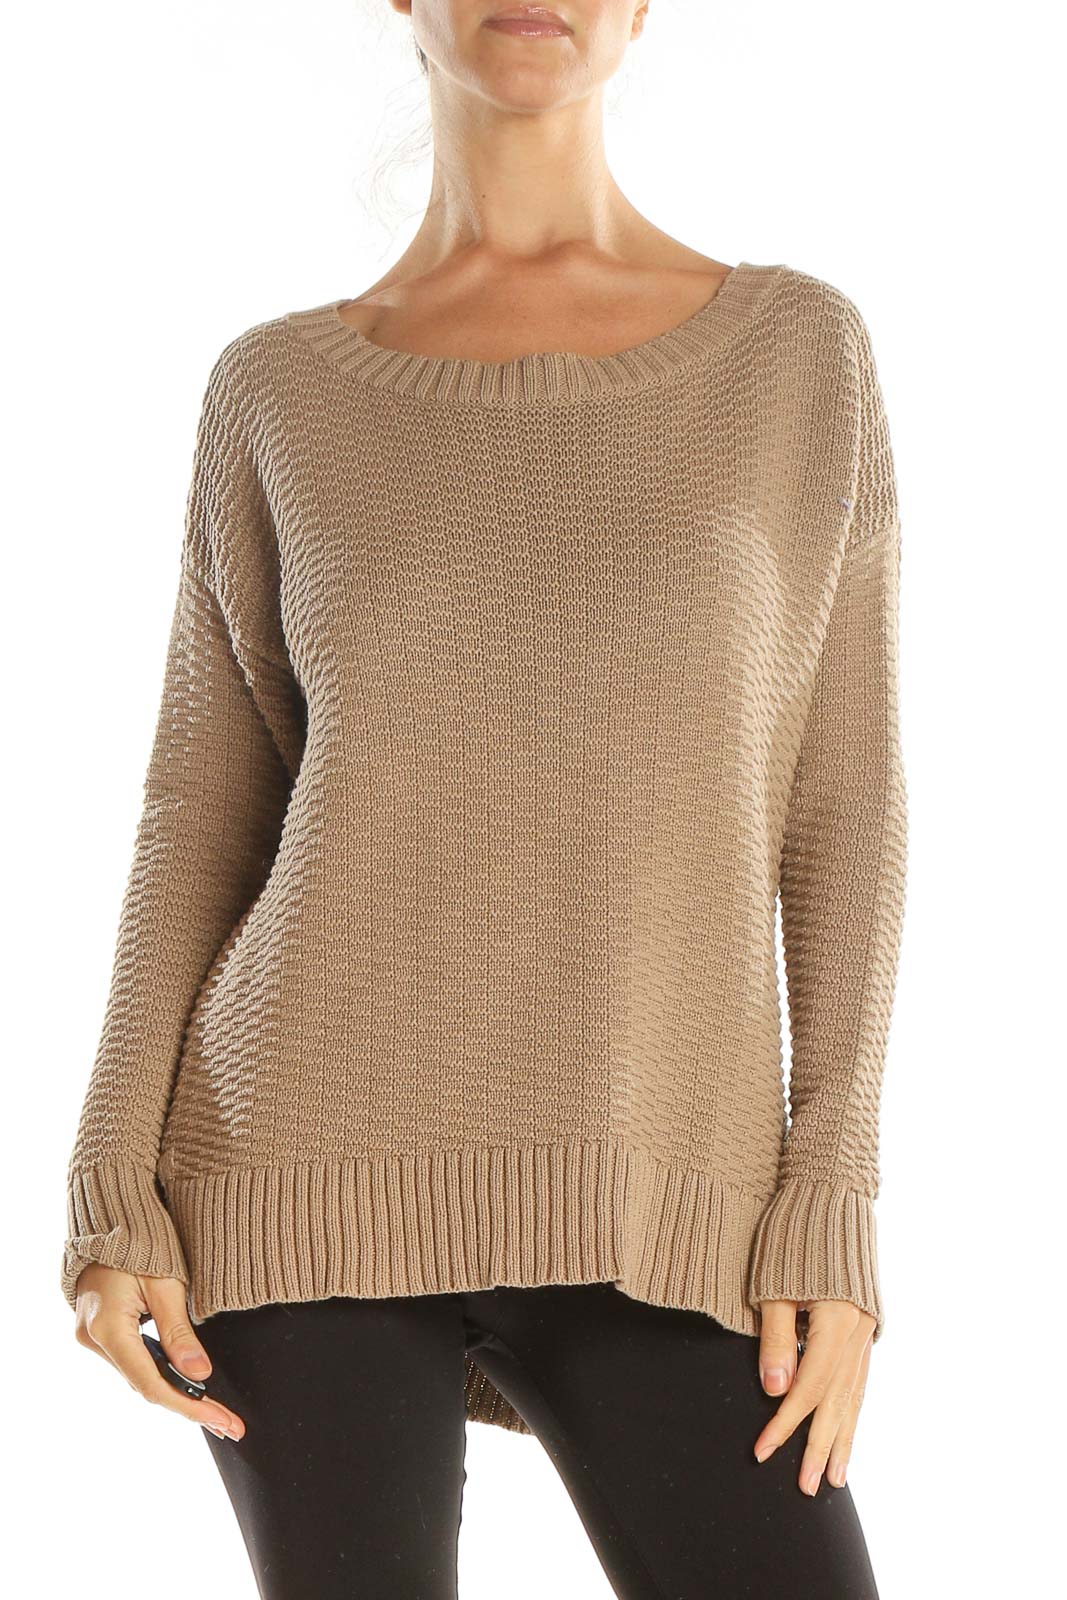 Brown All Day Wear Sweater Front